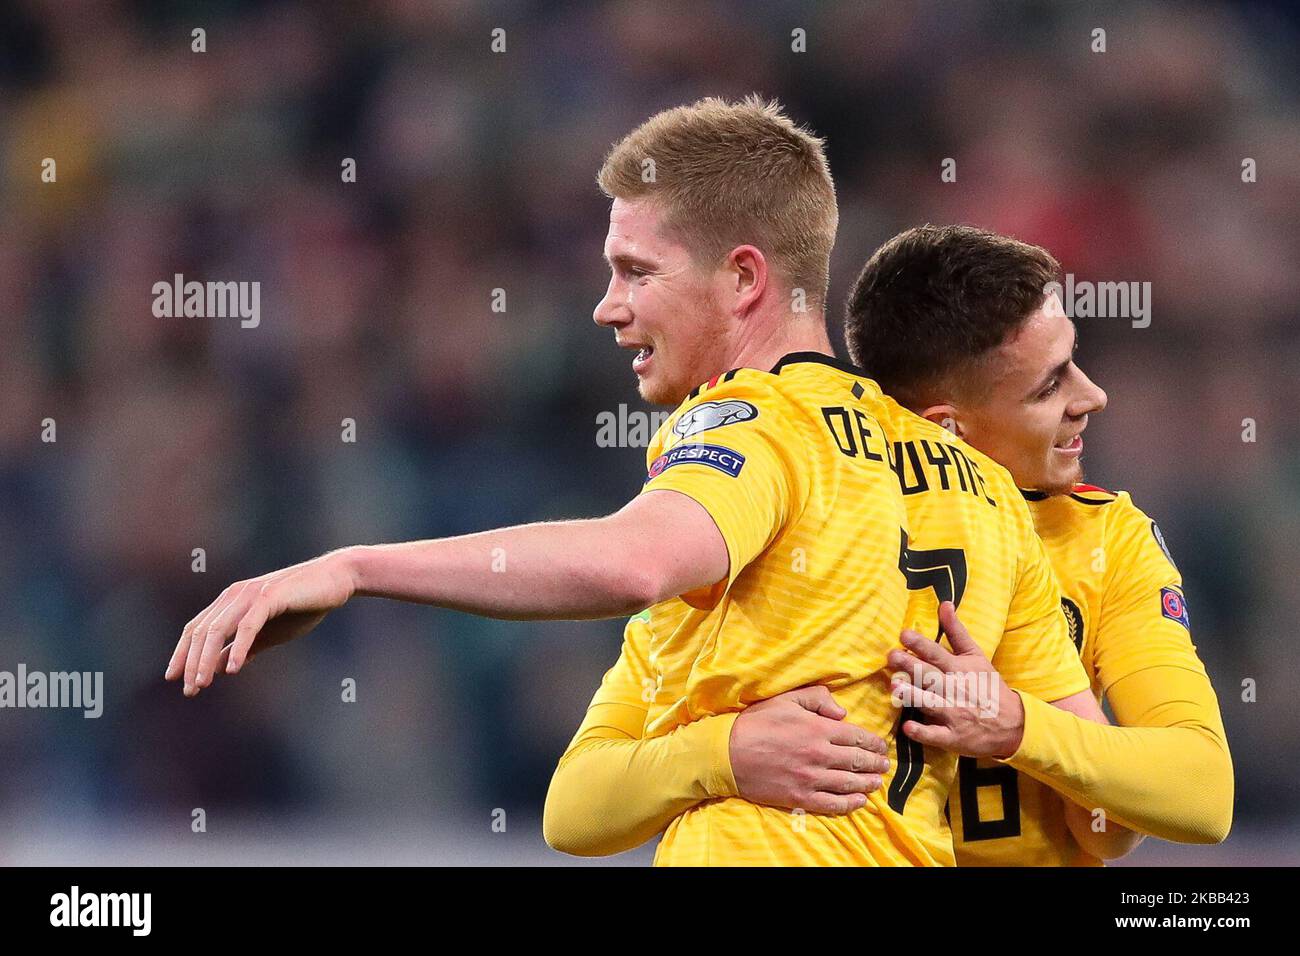 Thorgan Hazard and Kevin De Bruyne (R) of Belgium celebrates after scoring a goal during the UEFA Euro 2020 Qualifier between Russia and Belgium on November 16, 2019 in Saint Petersburg, Russia. (Photo by Igor Russak/NurPhoto) Stock Photo